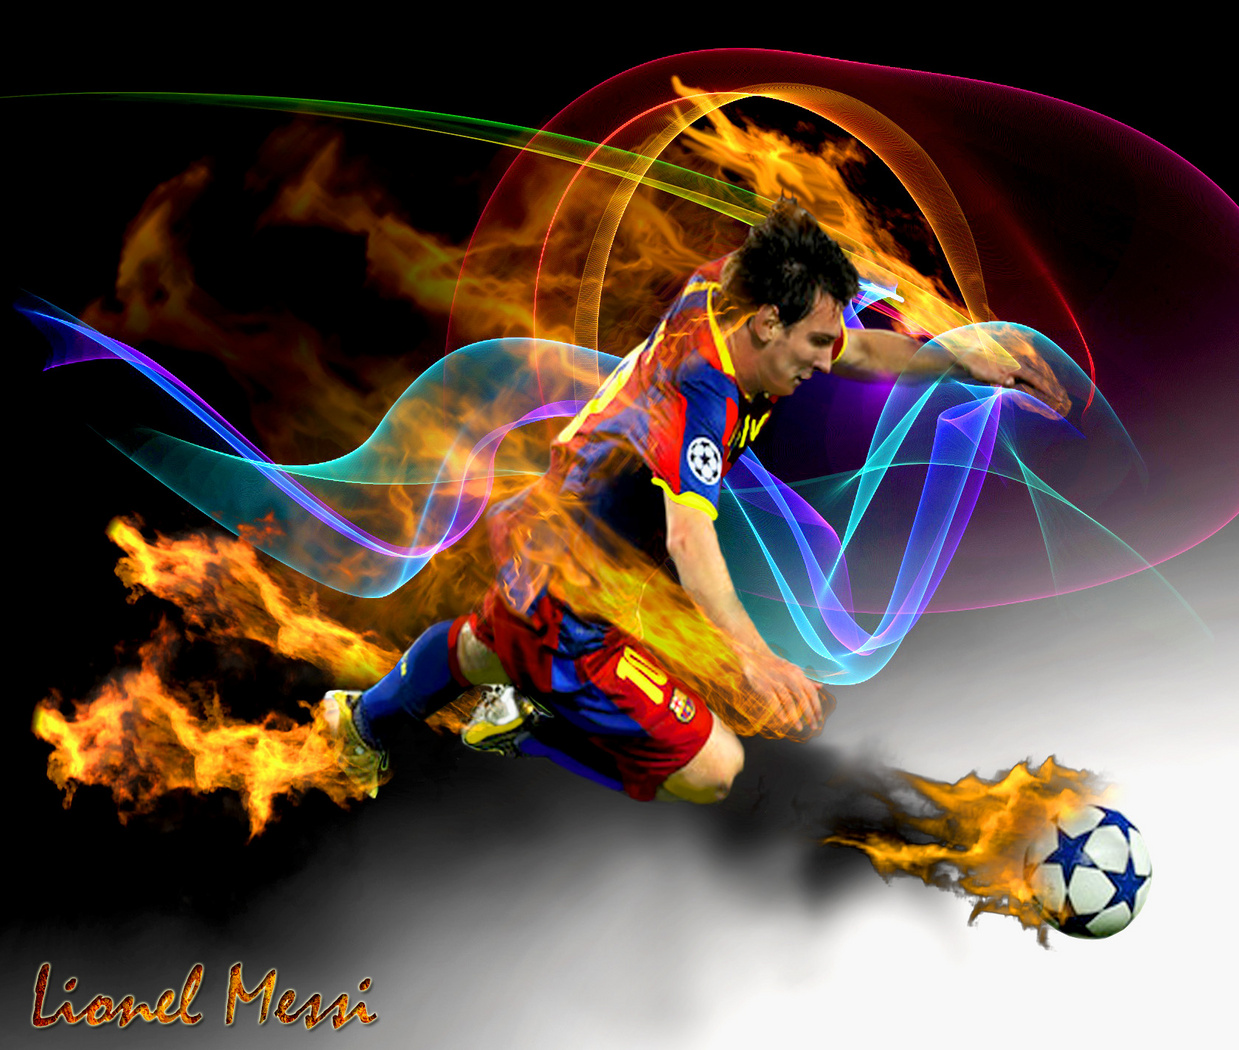 Lionel Messi wallpapers Craftily Created 1239x1050